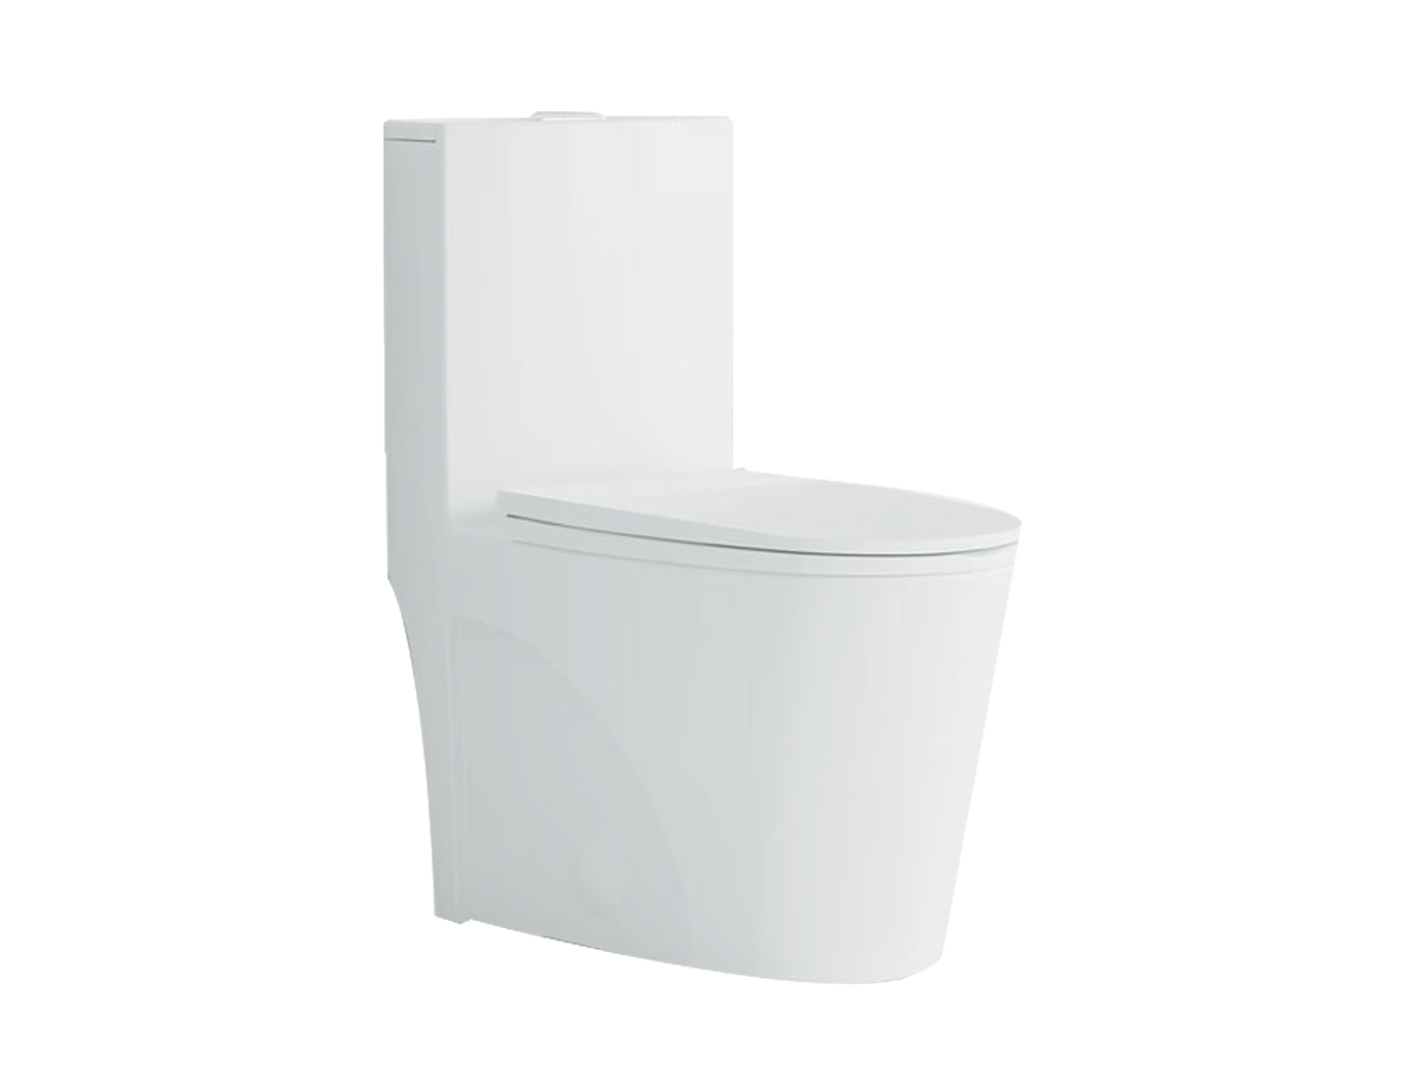 MJ3093-One Piece Toilet Elongated Floor Mounted